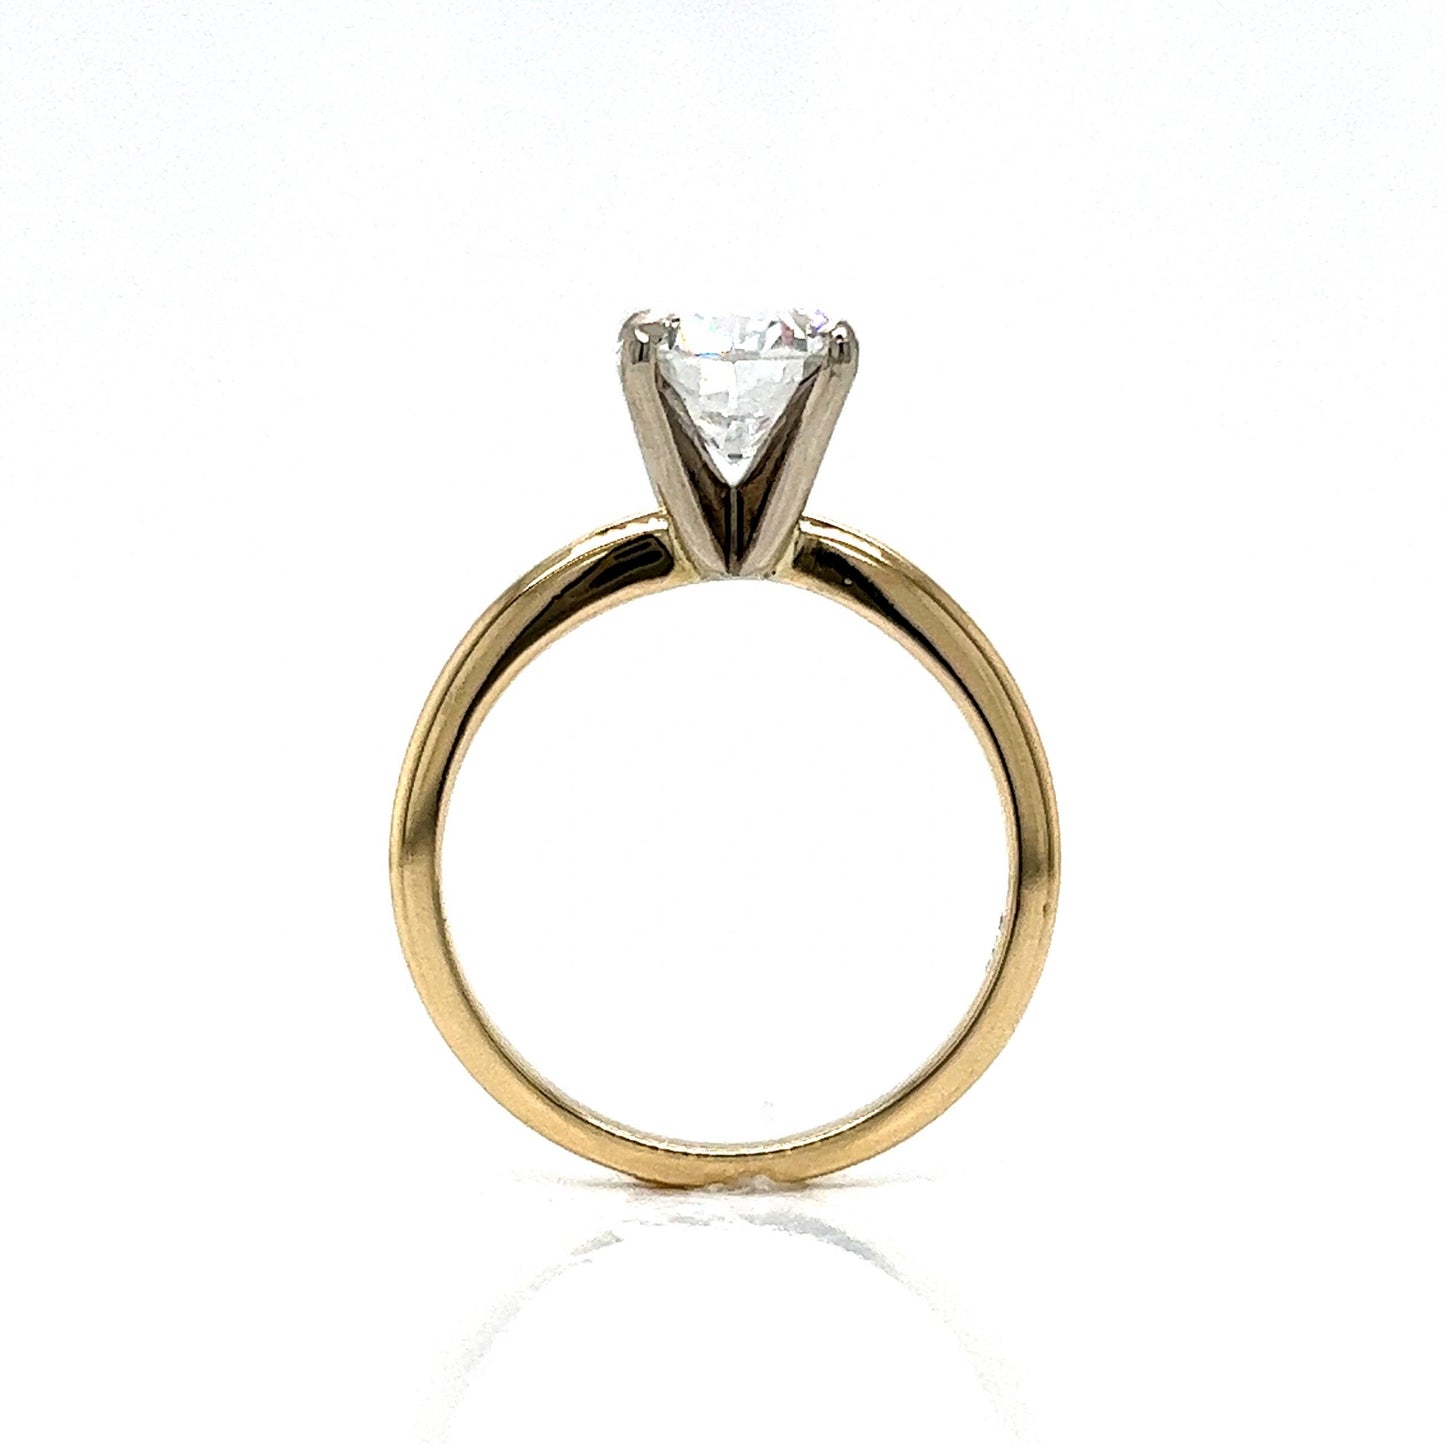 2.12 Solitaire Cushion Cut Diamond Engagement Ring in 14k Gold